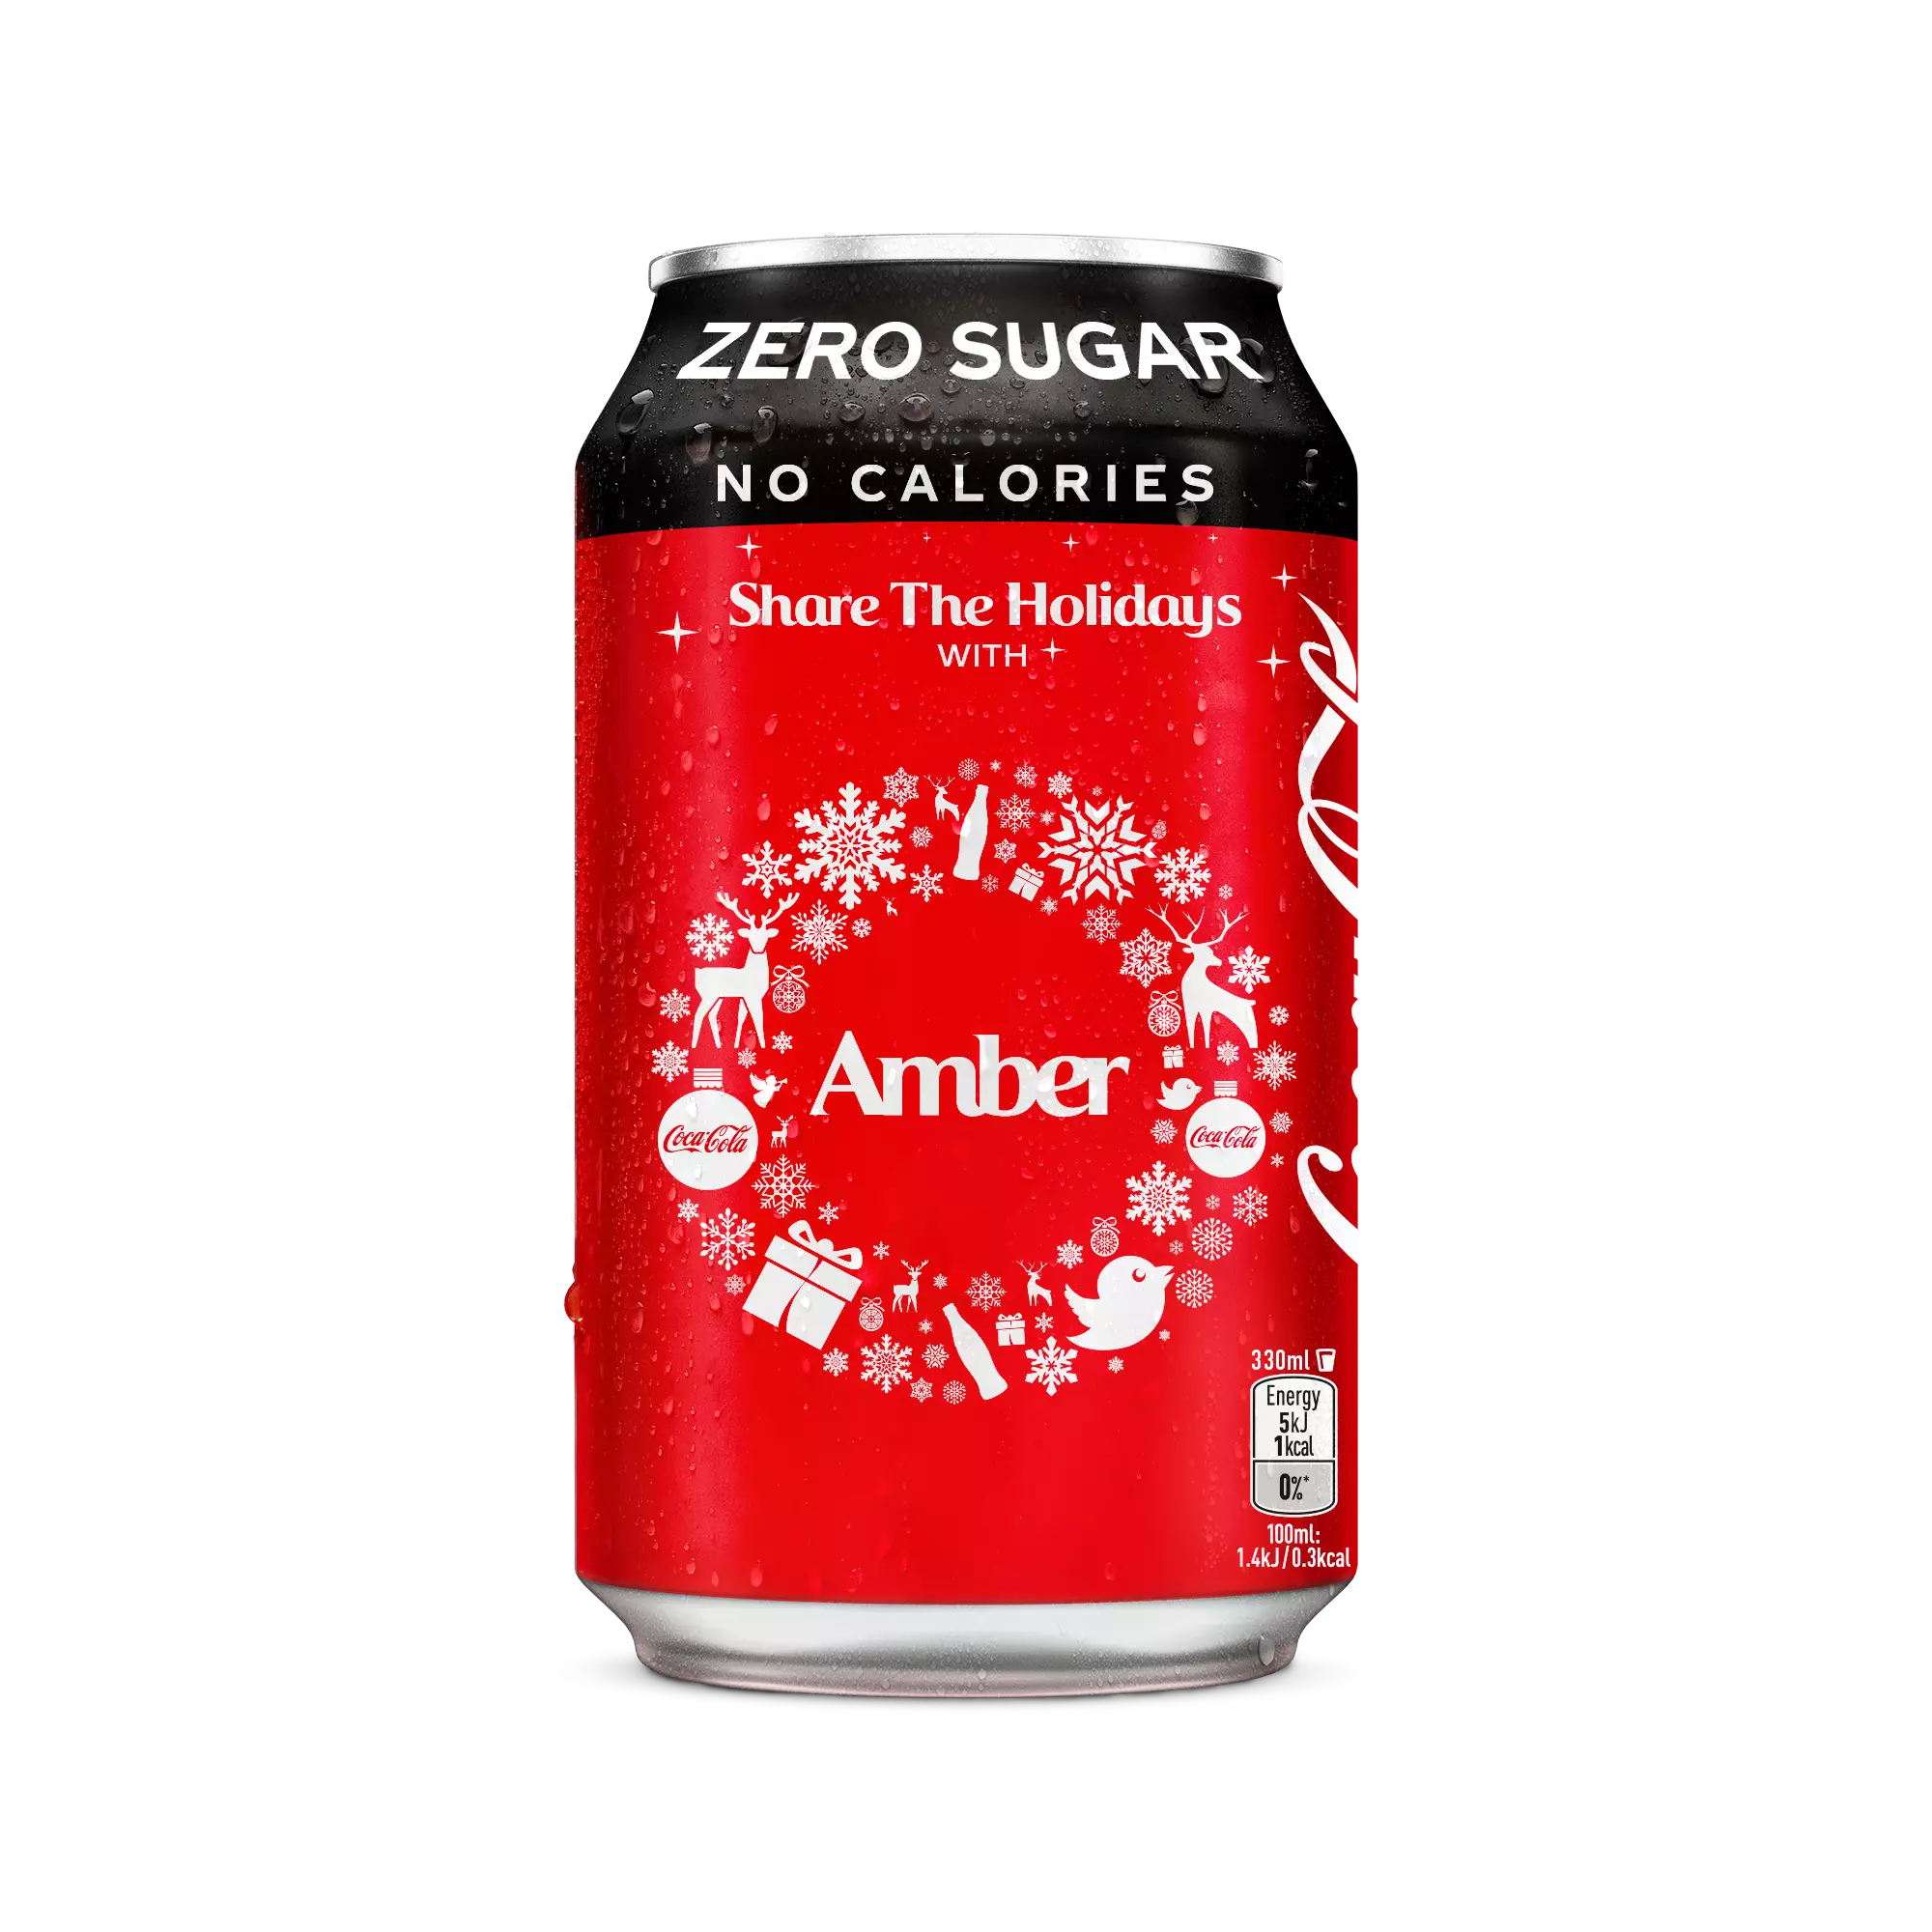 You can order a free can of Coke Zero with your name on it (